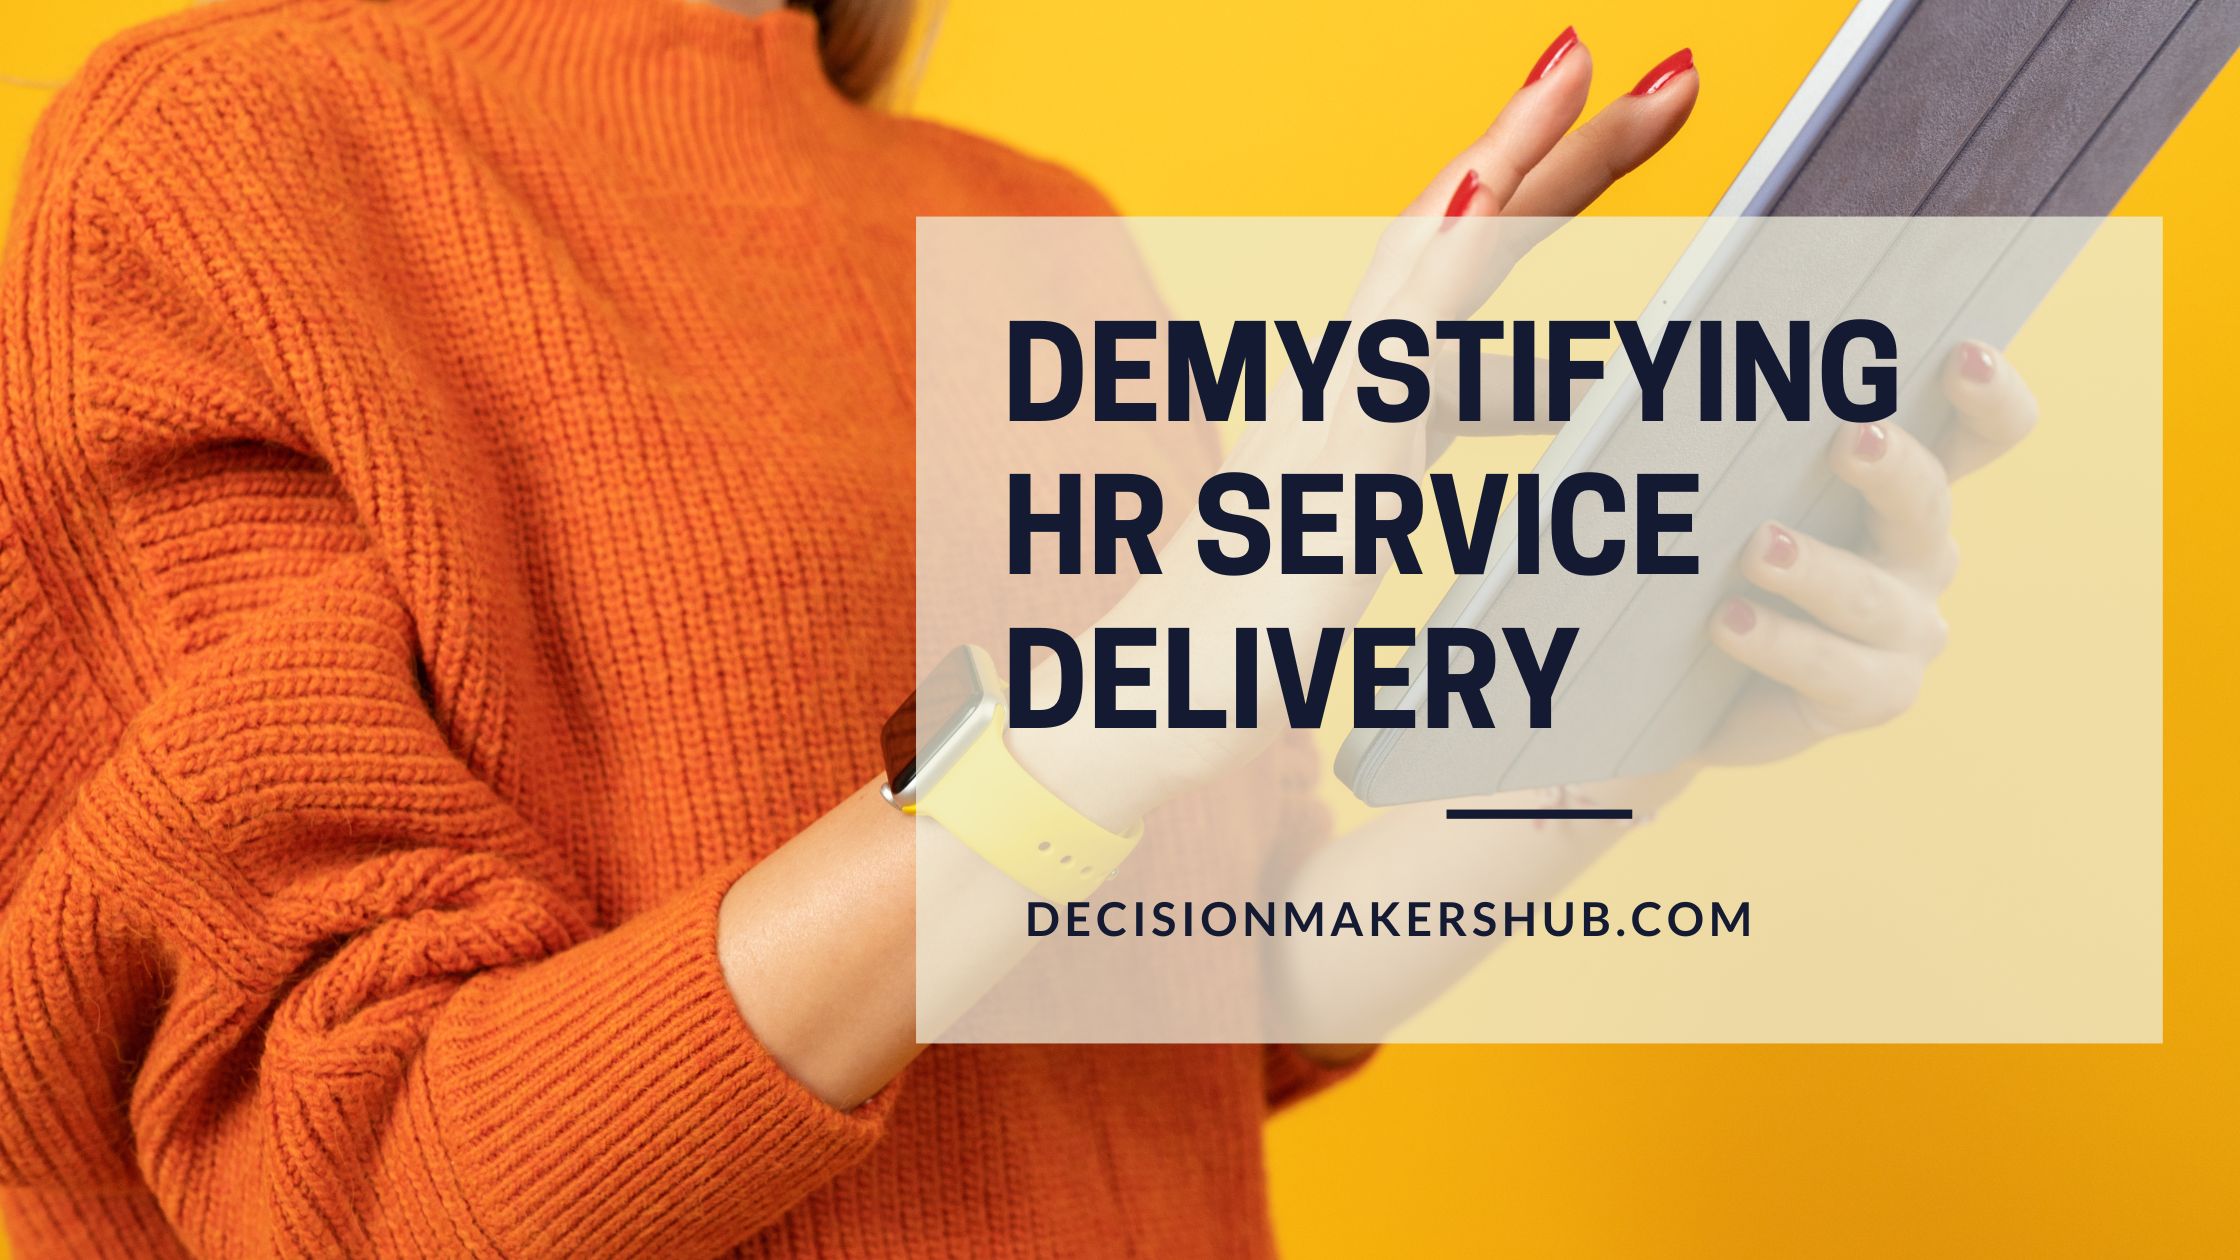 Demystifying HR Service Delivery: The Cornerstone of Organizational Success